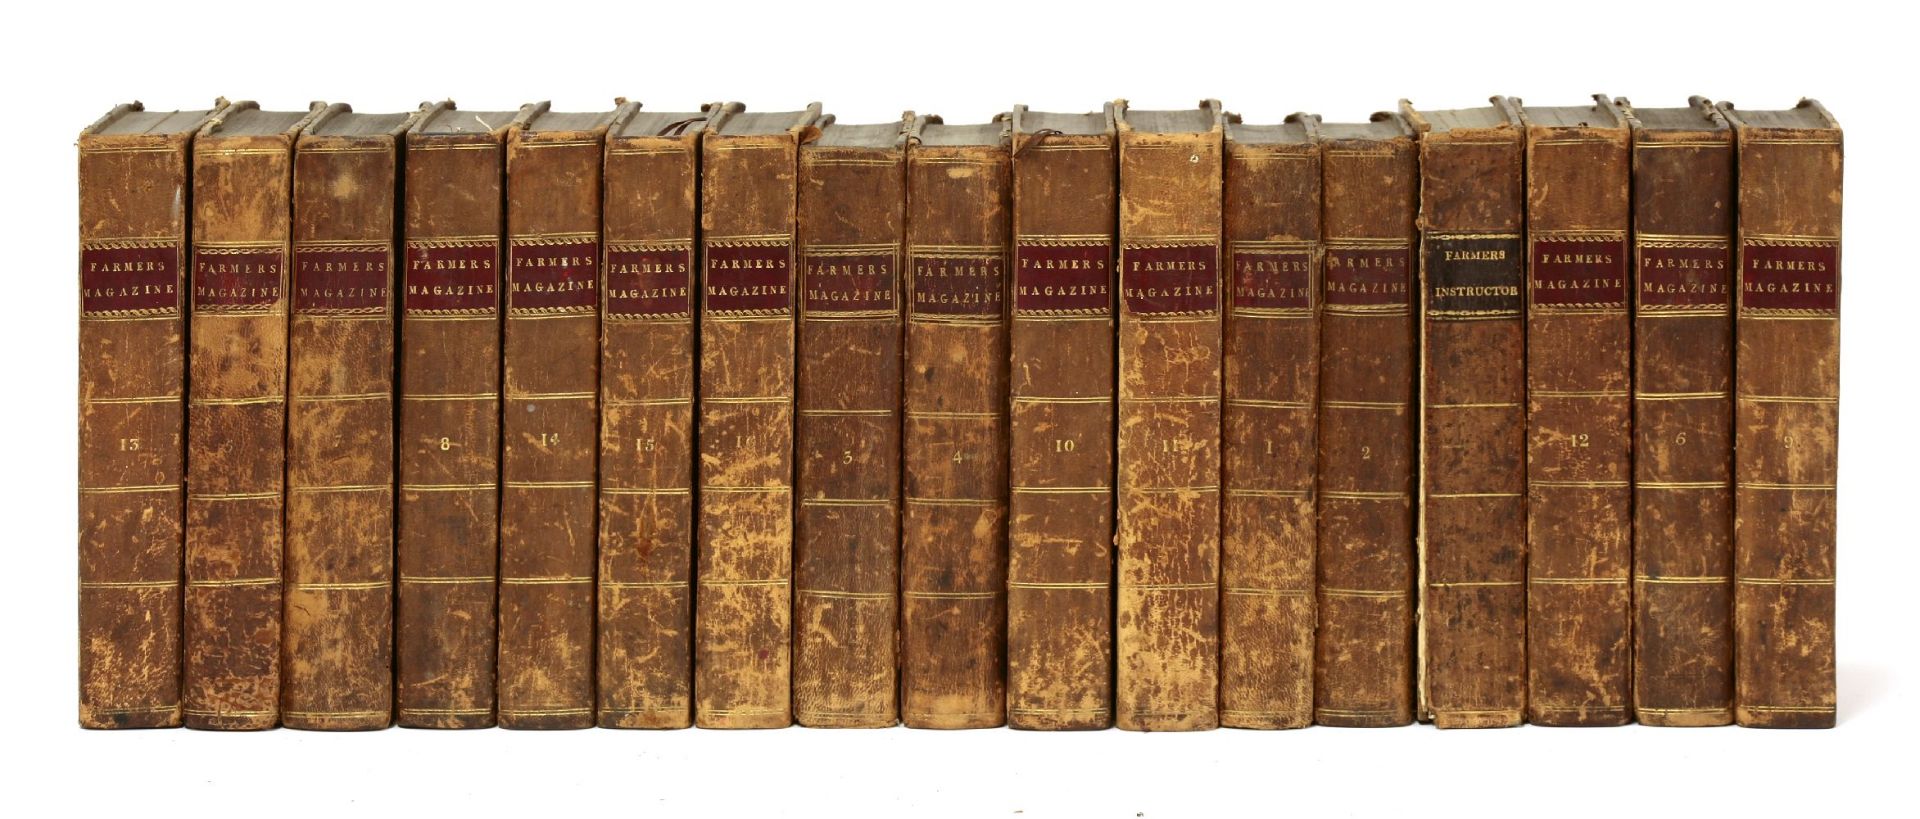 The Farmer's Magazine: Volumes 1-16. Constable, Edinburgh, 1801-1815, all first editions except